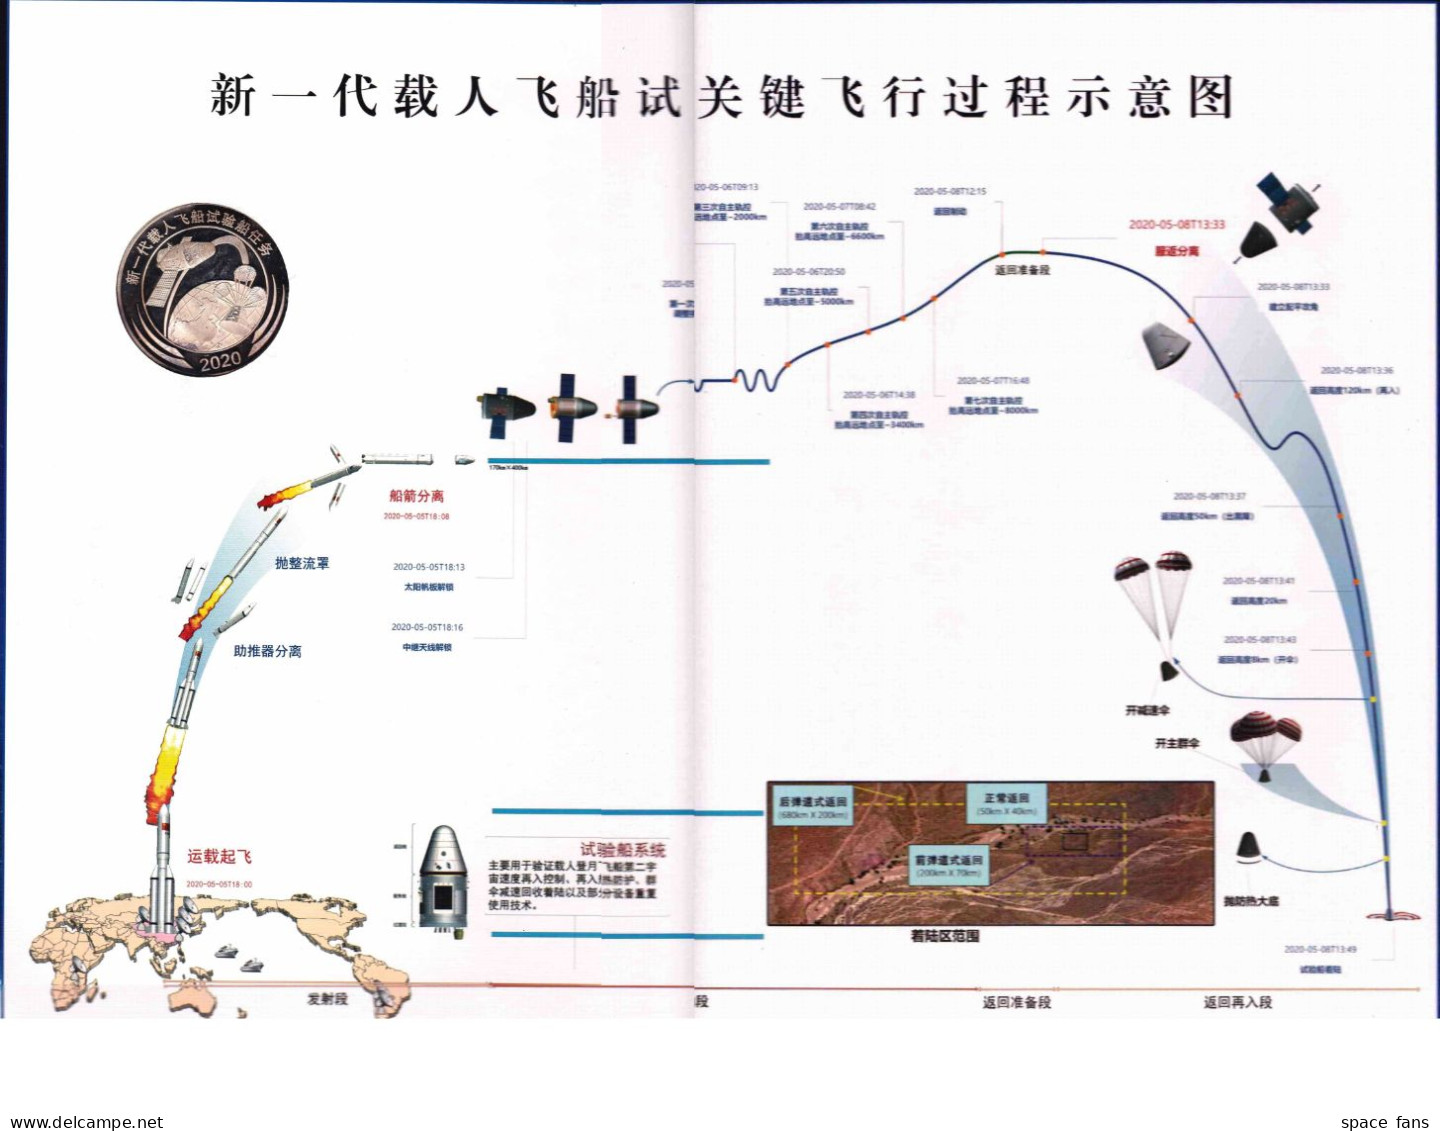 CHINA 2020 Next-Generation Crewed Spacecraft FLOWN Special Metal Medal,Really Space Flown Item With COA,177 Made - Asia